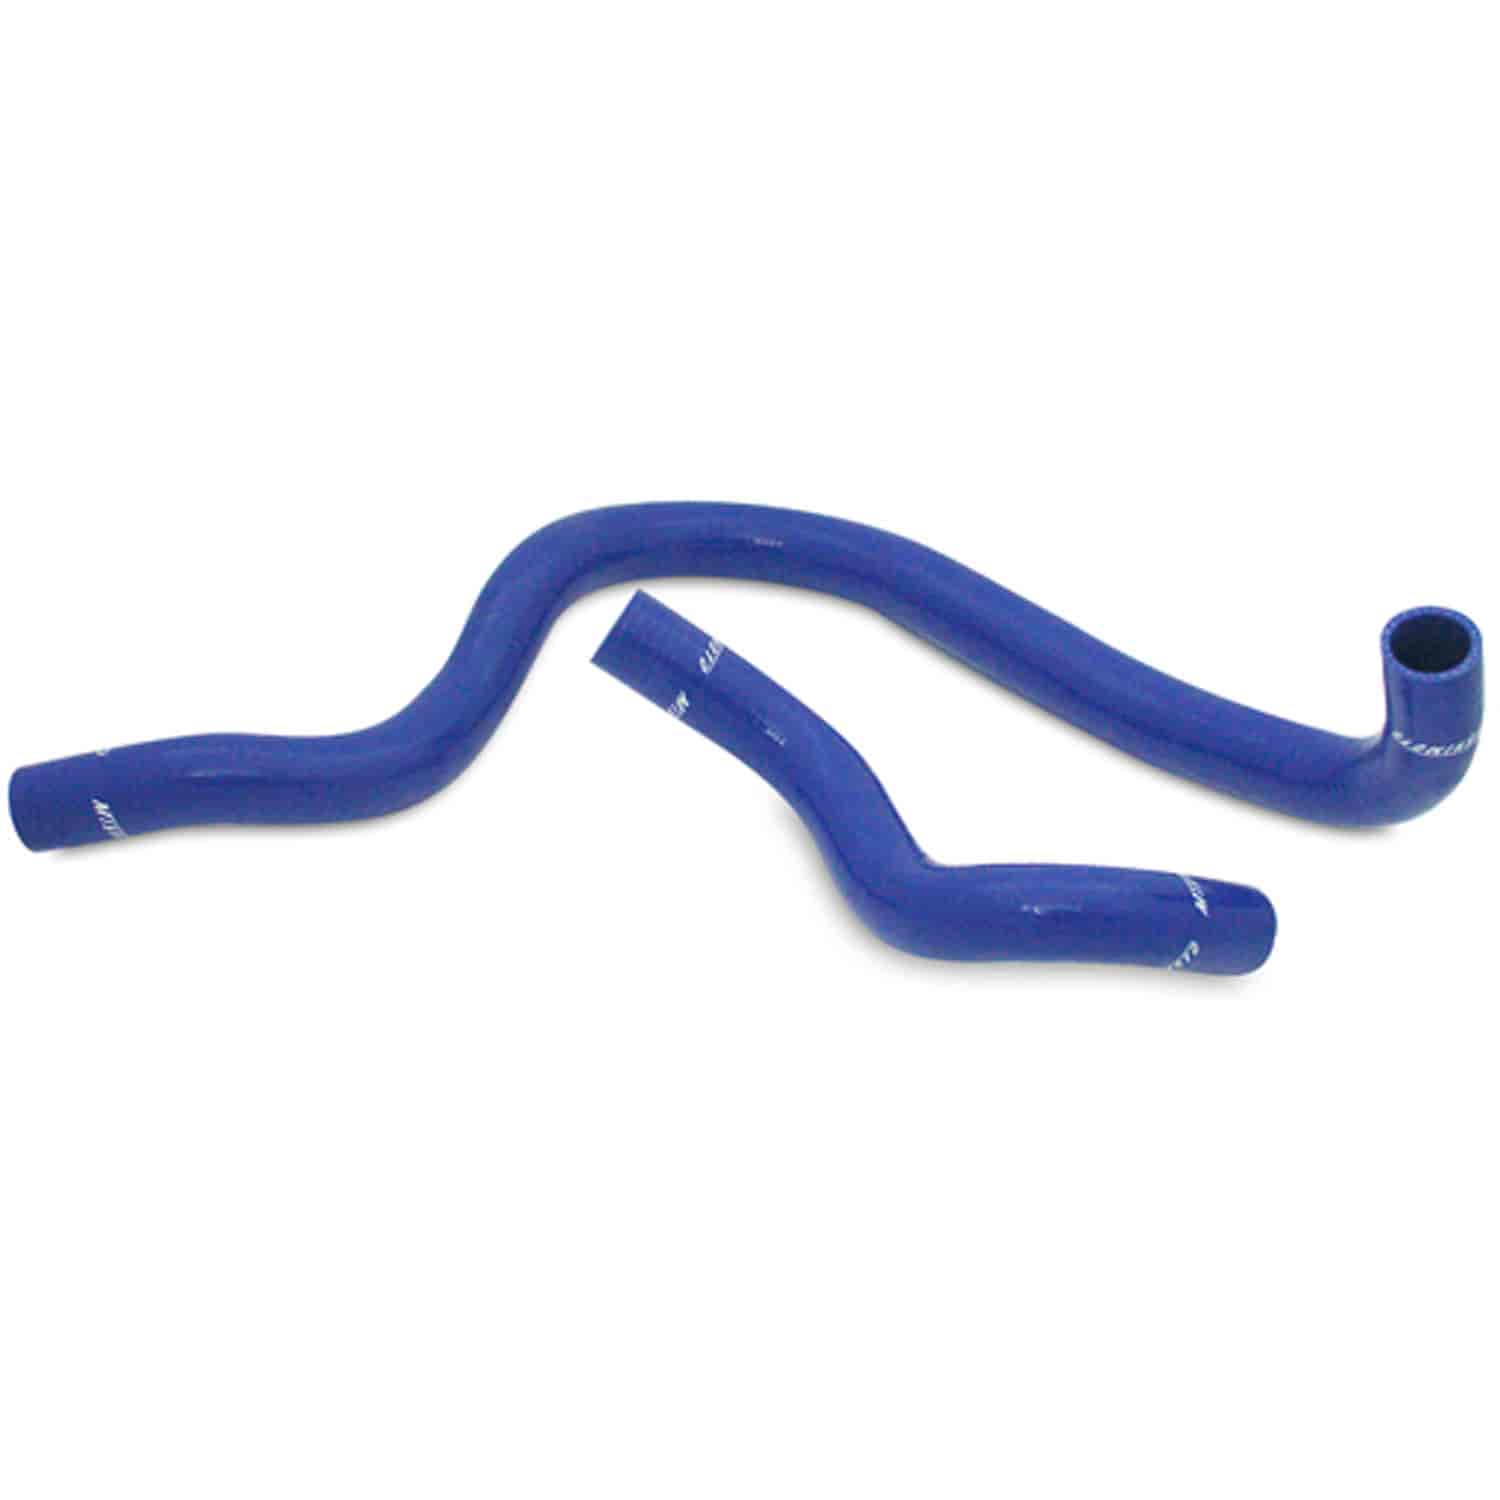 Silicone Radiator Hose Kit.This kit will fit both